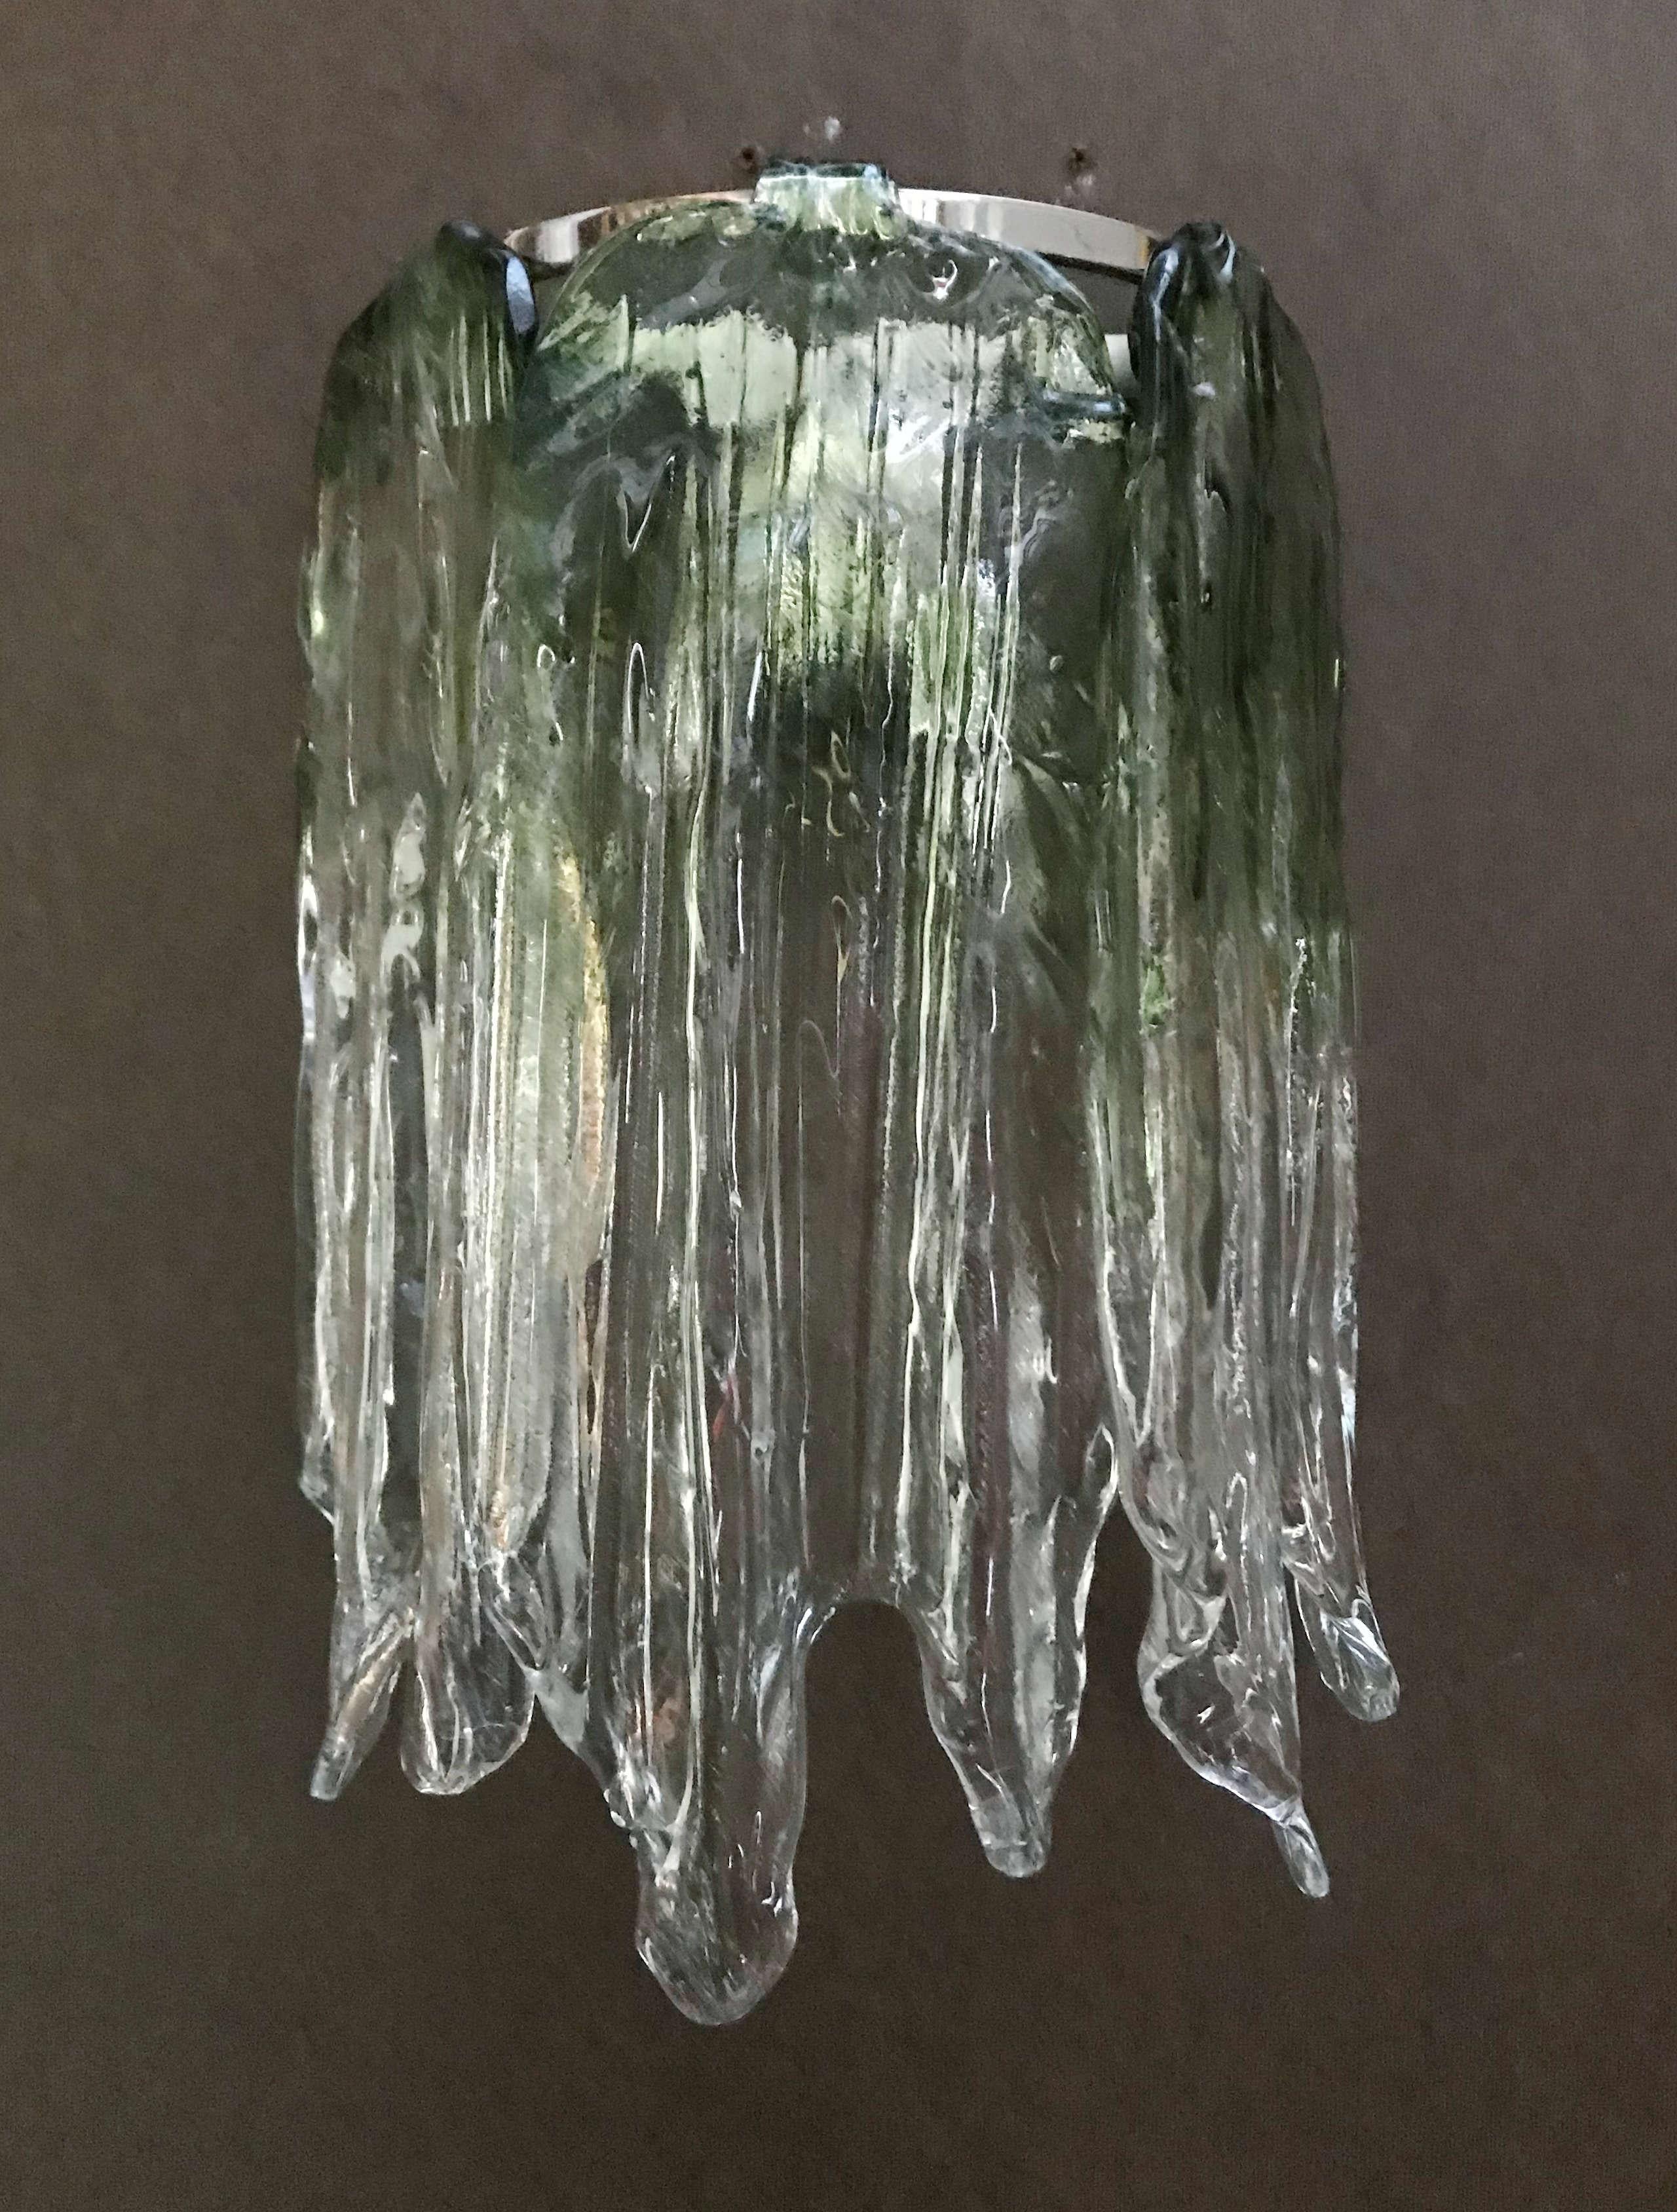 Italian wall lights with original vintage green and clear fiamme glasses by Mazzega from 1960s, mounted on newly made chrome frames / Made in Italy
Measures: height 14 inches, width 10 inches, depth 6 inches
2 lights / E12 type / max 40W each
Order